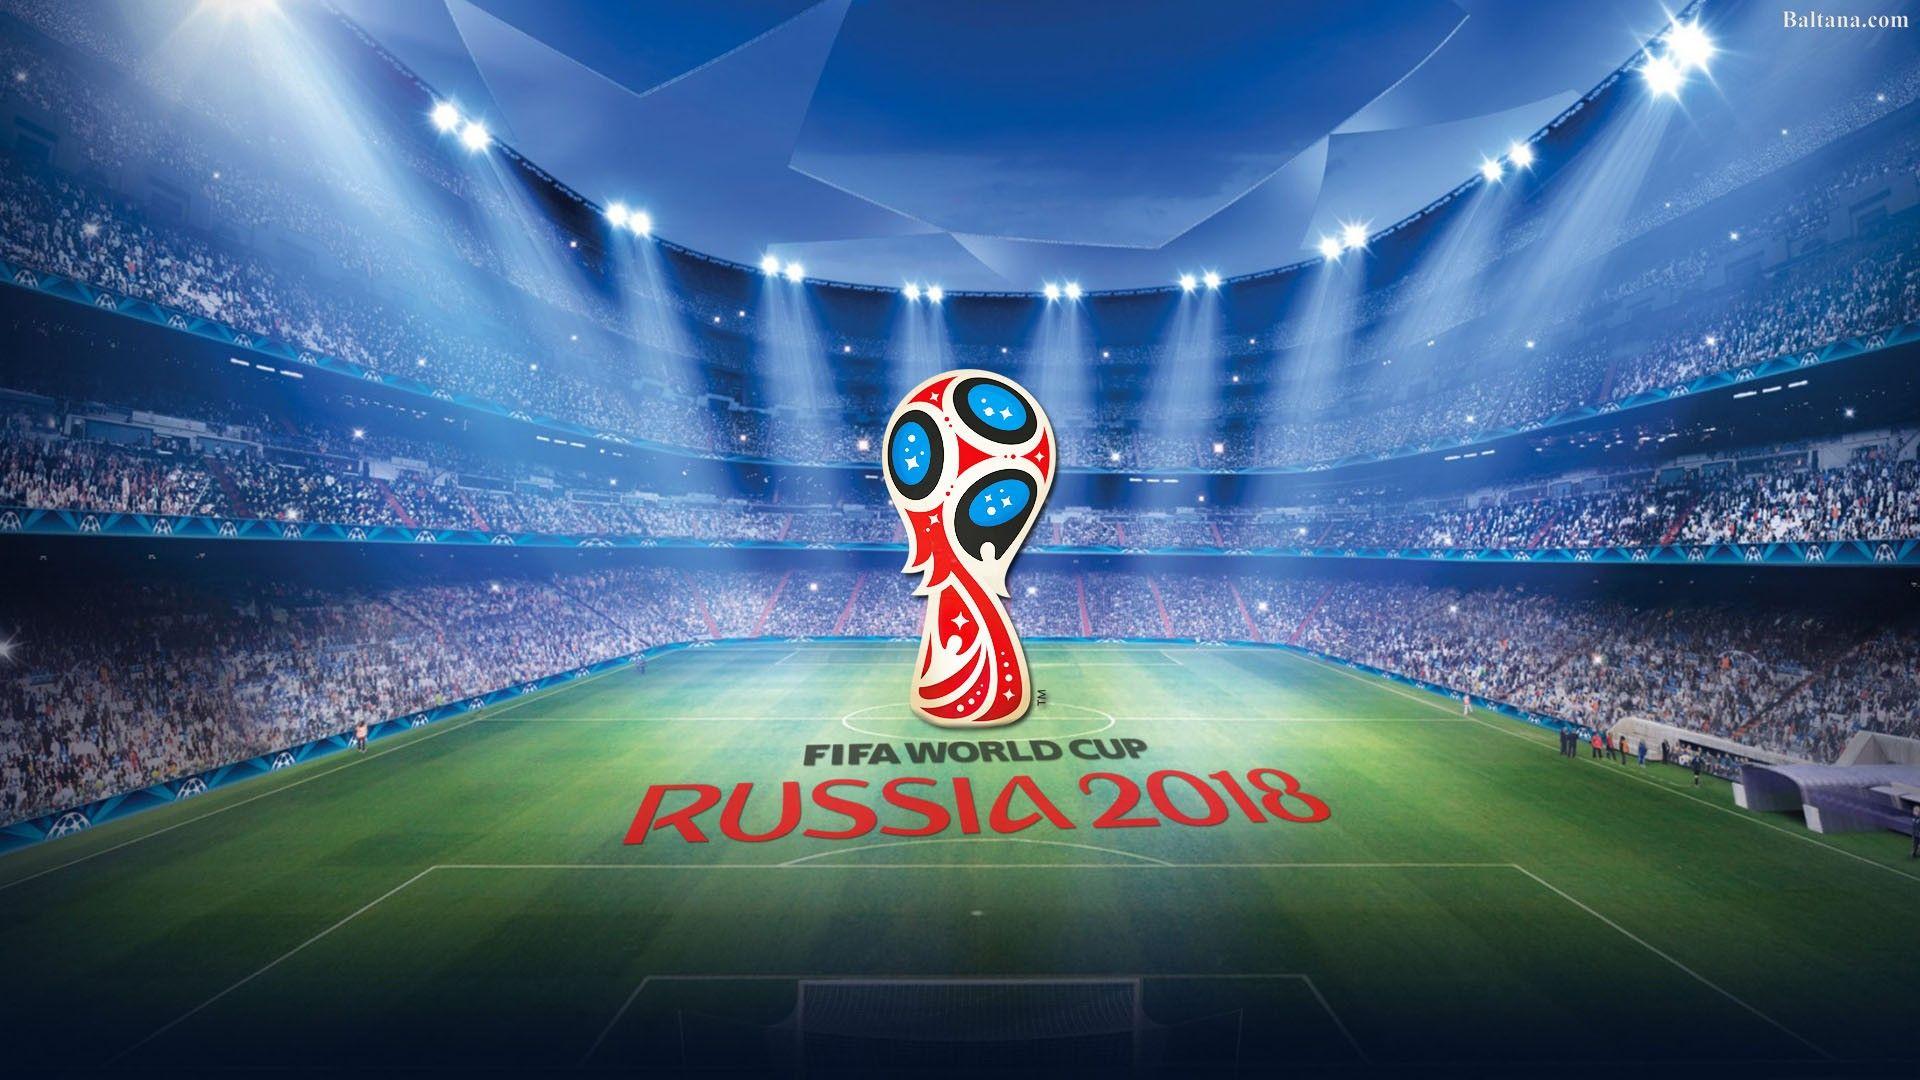 FIFA World Cup HQ Background Wallpaper 34006